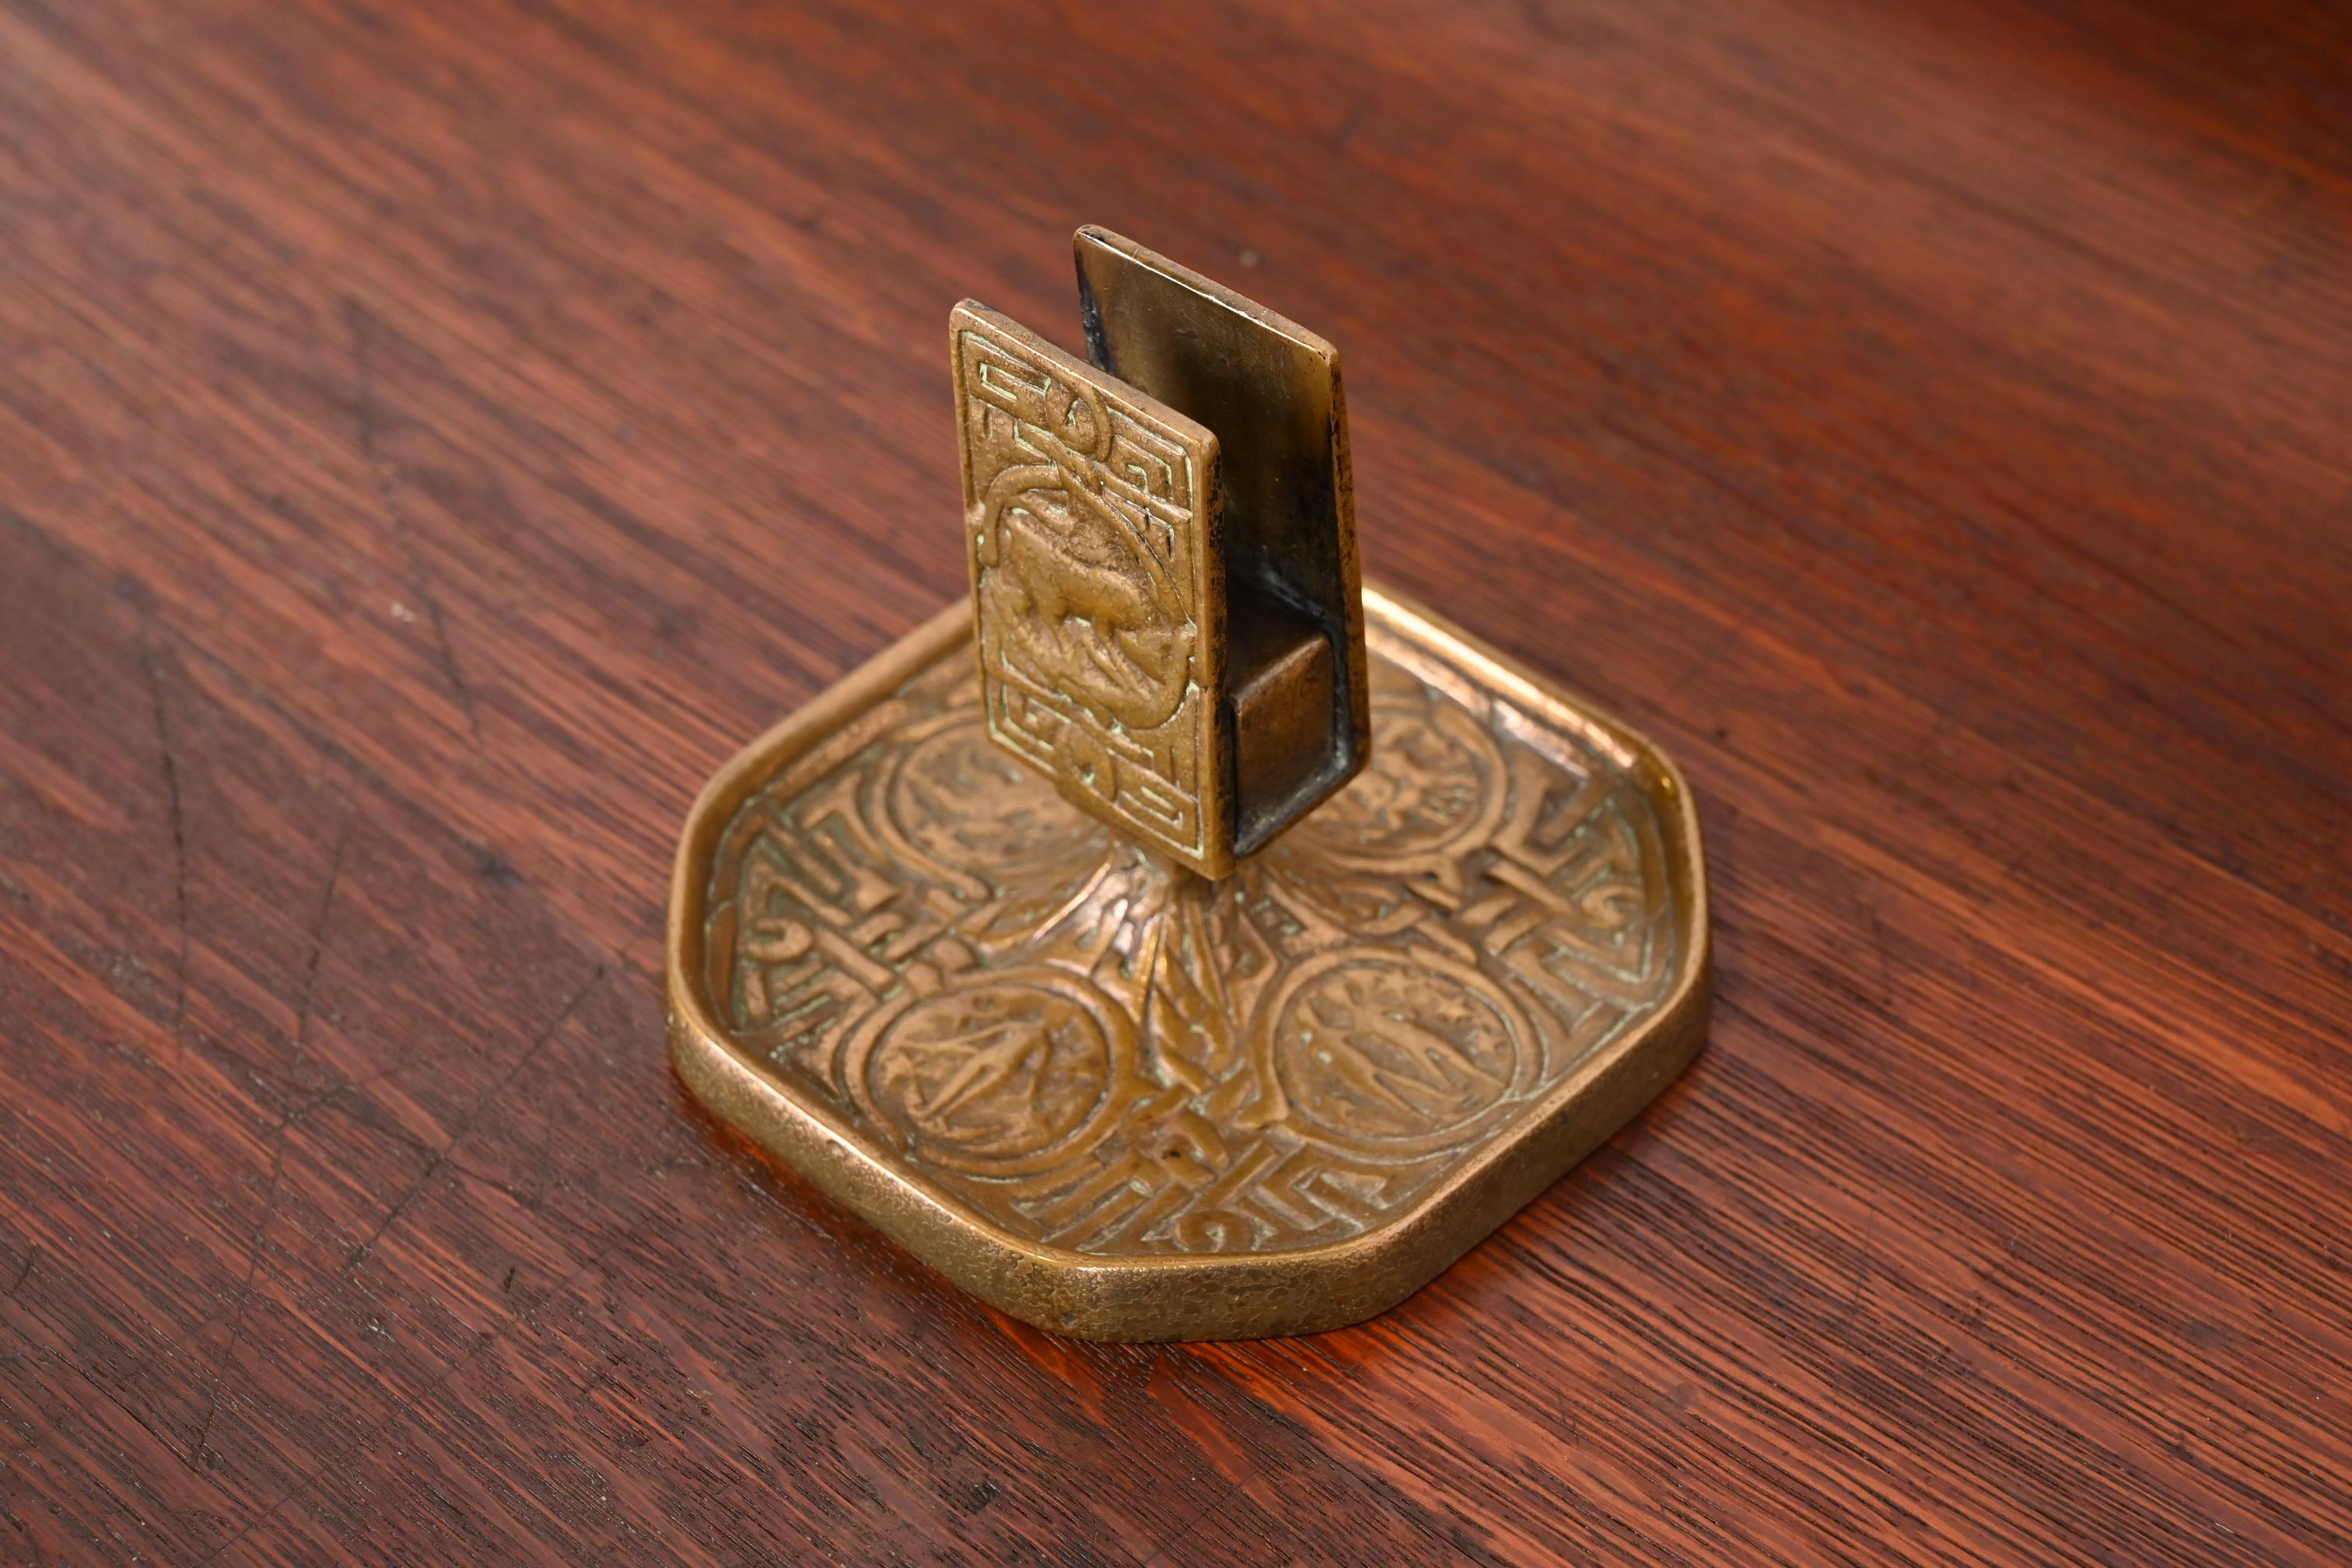 Tiffany Studios New York Zodiac Bronze Doré Match Box Holder In Good Condition For Sale In South Bend, IN